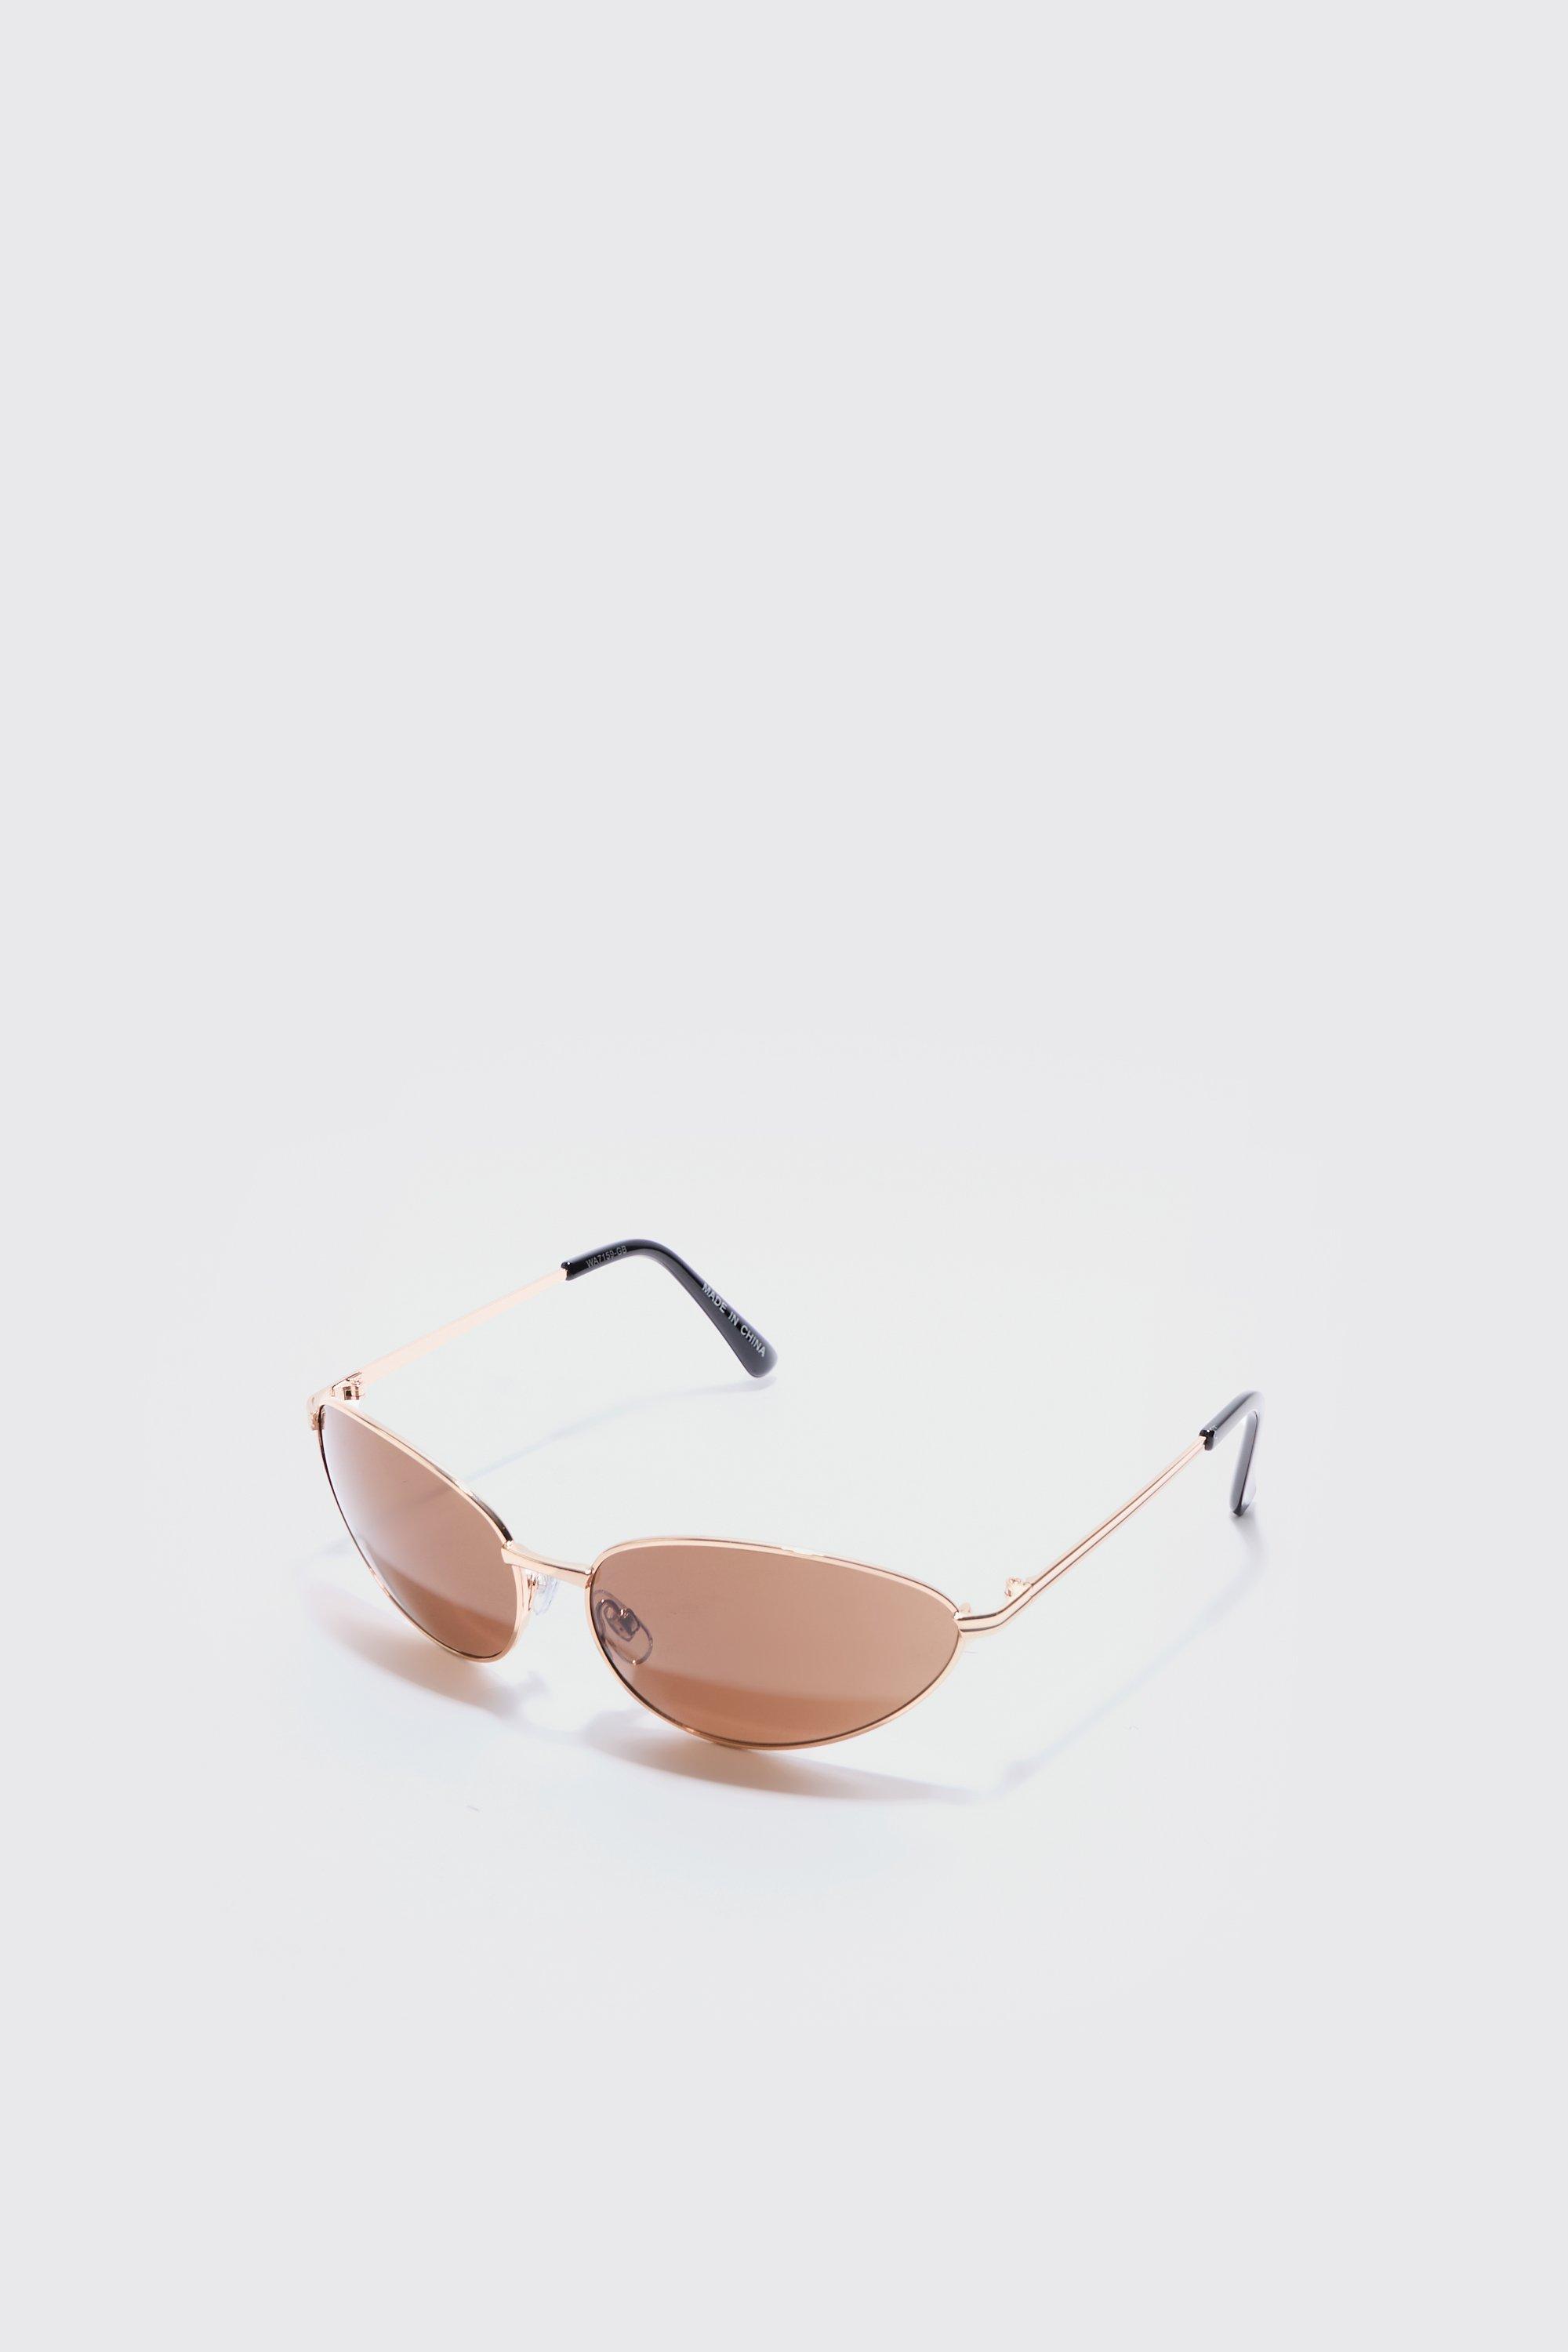 Image of Angled Metal Sunglasses With Brown Lens In Gold, Metallics